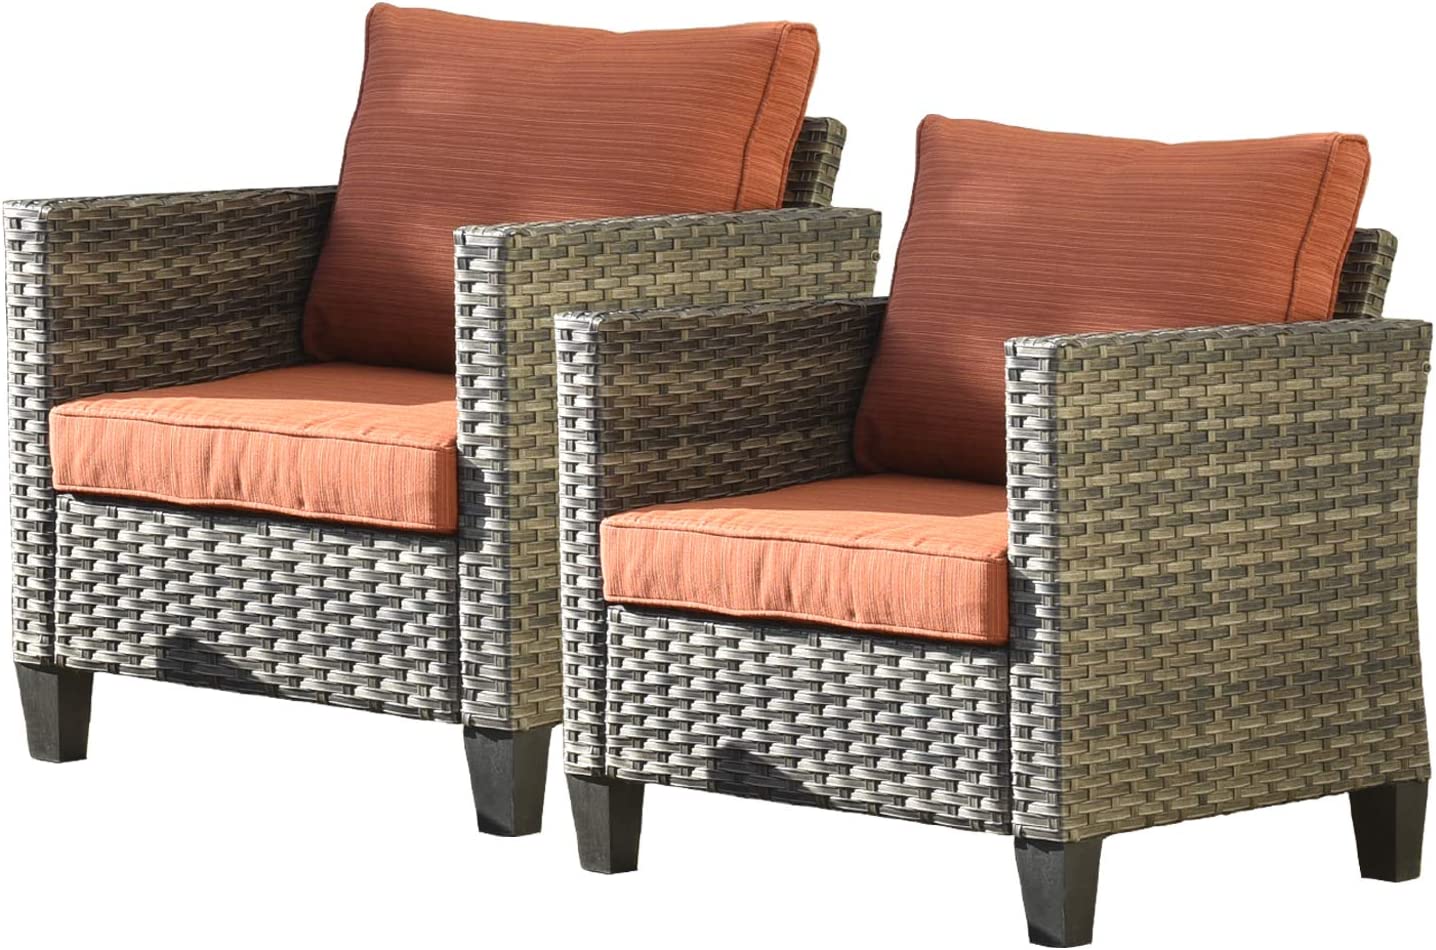 SET OF 2 Wicker Outdoor Arm Chairs